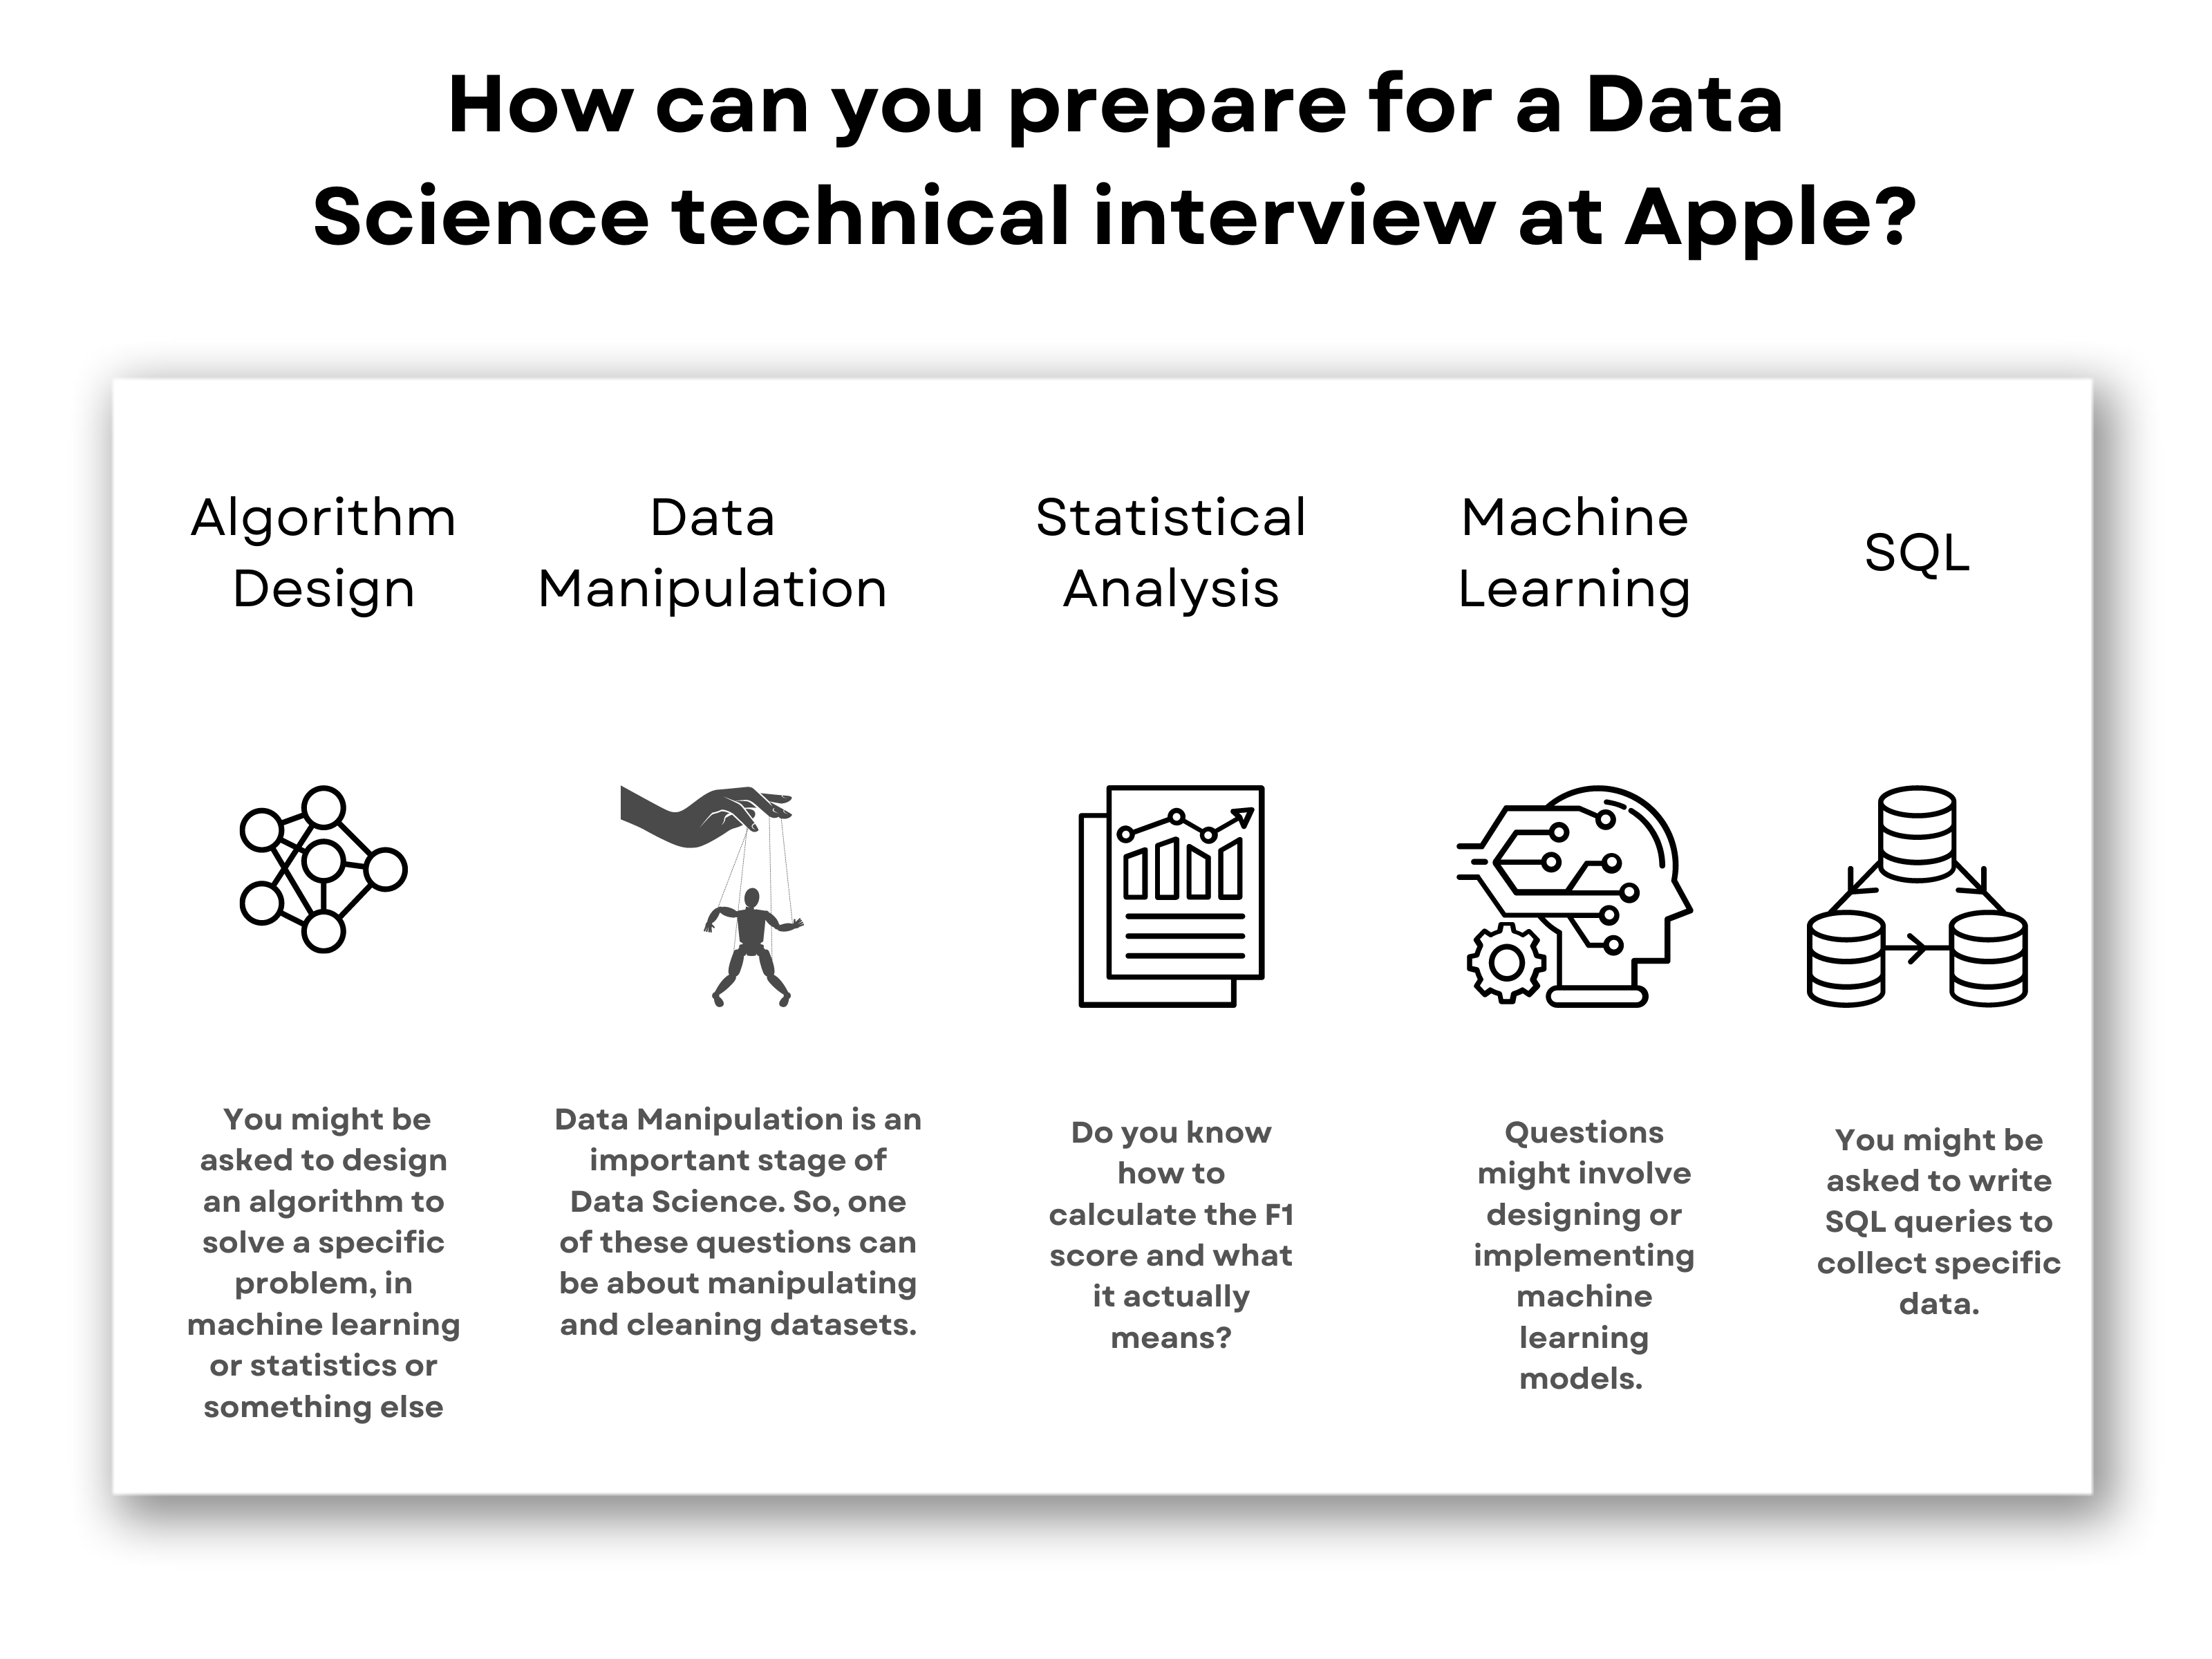 How can you prepare for a Data Science technical interview at Apple